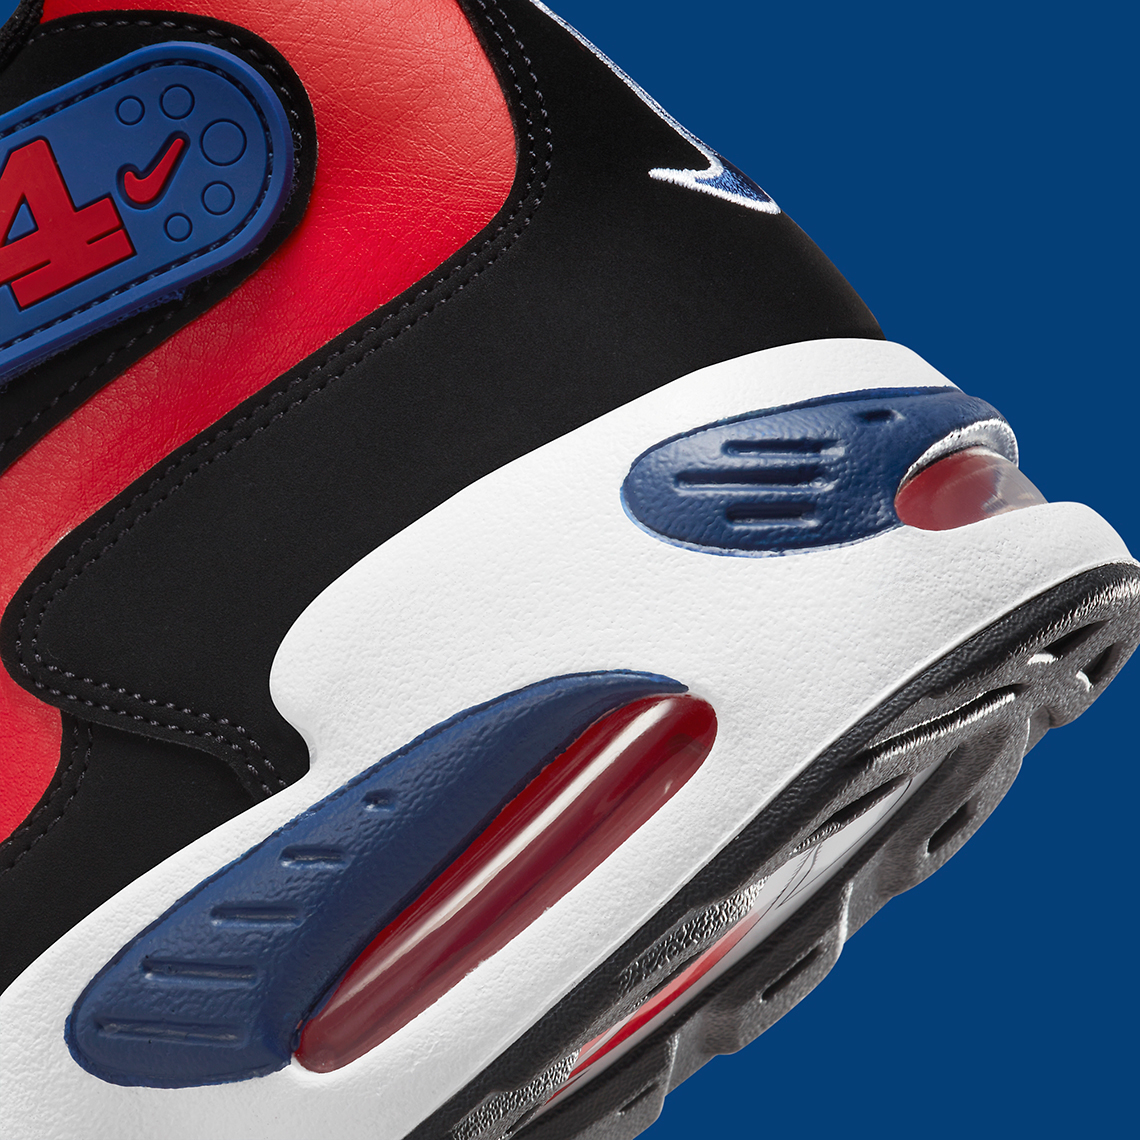 Nike Air Griffey Max 1 Navy Red Release Date 7